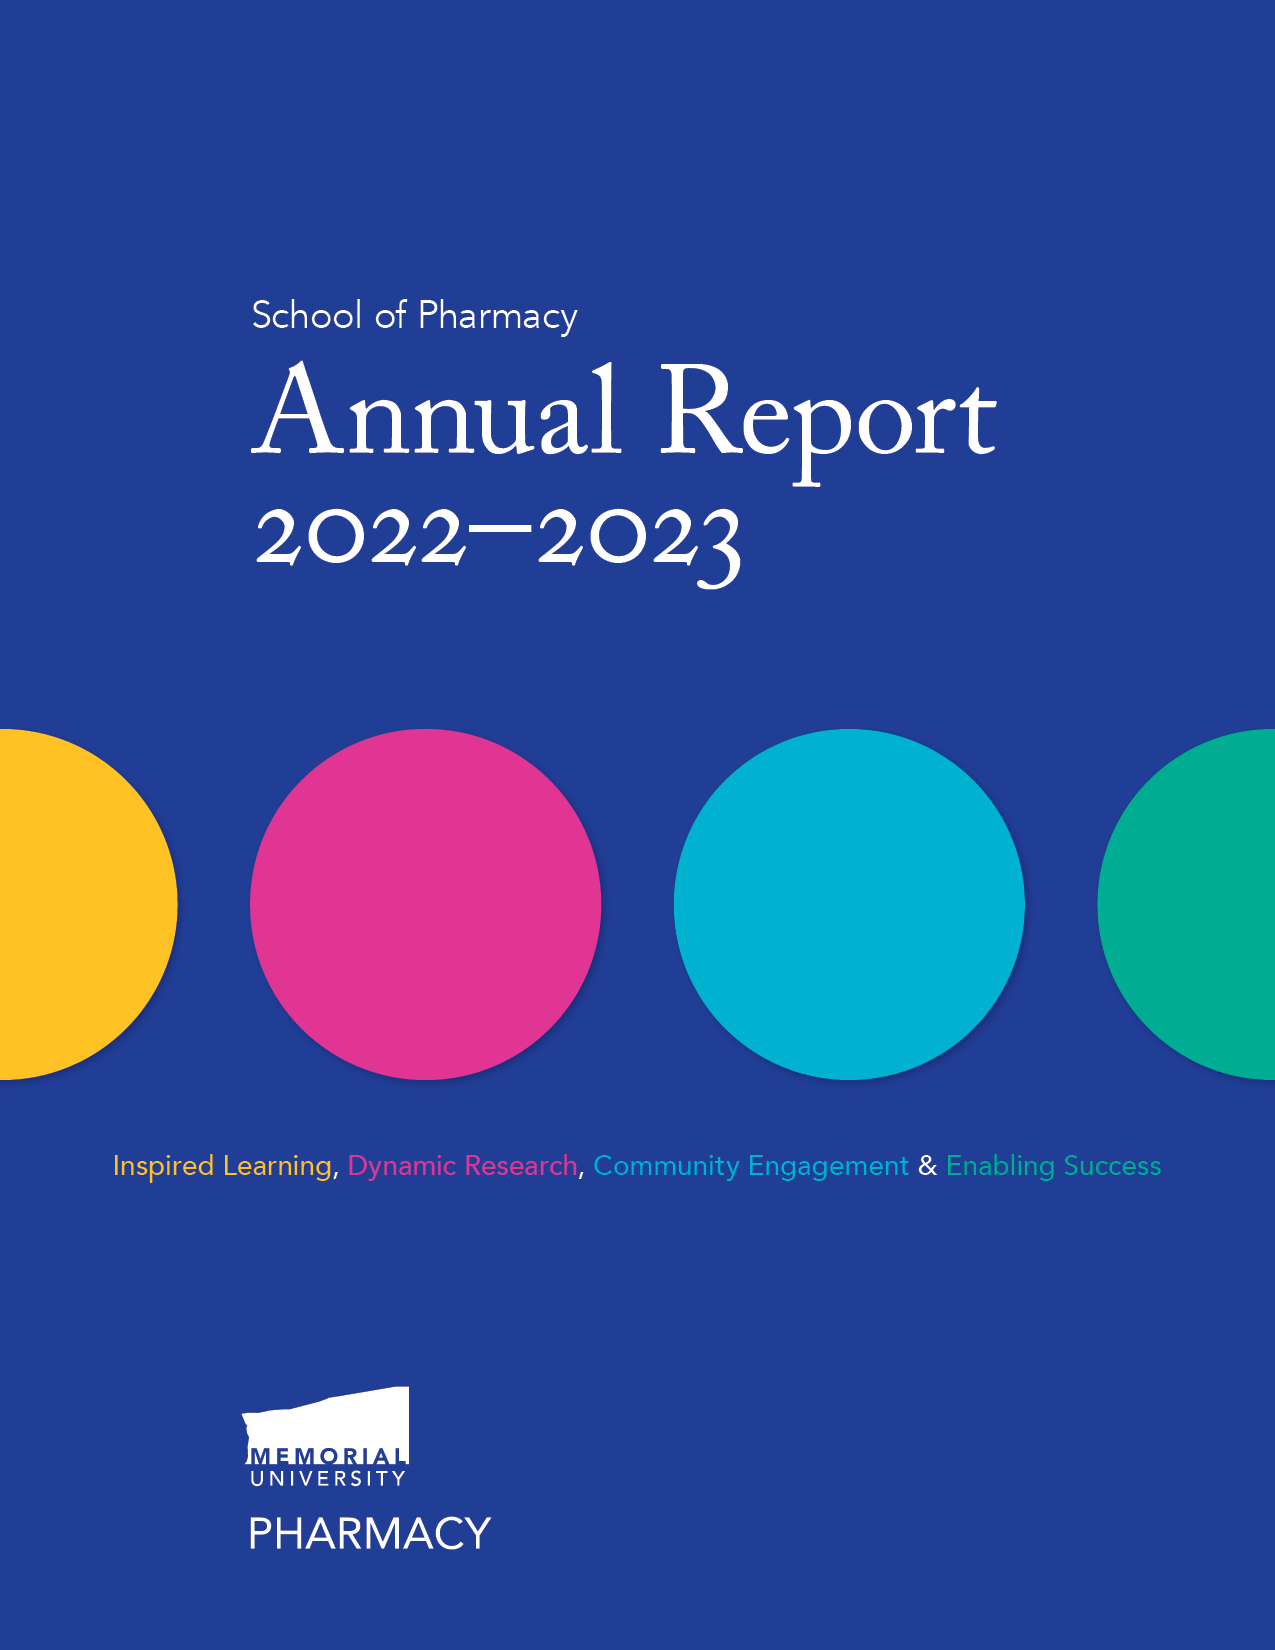 School of Pharmacy Annual Report 2022-2023 - front cover